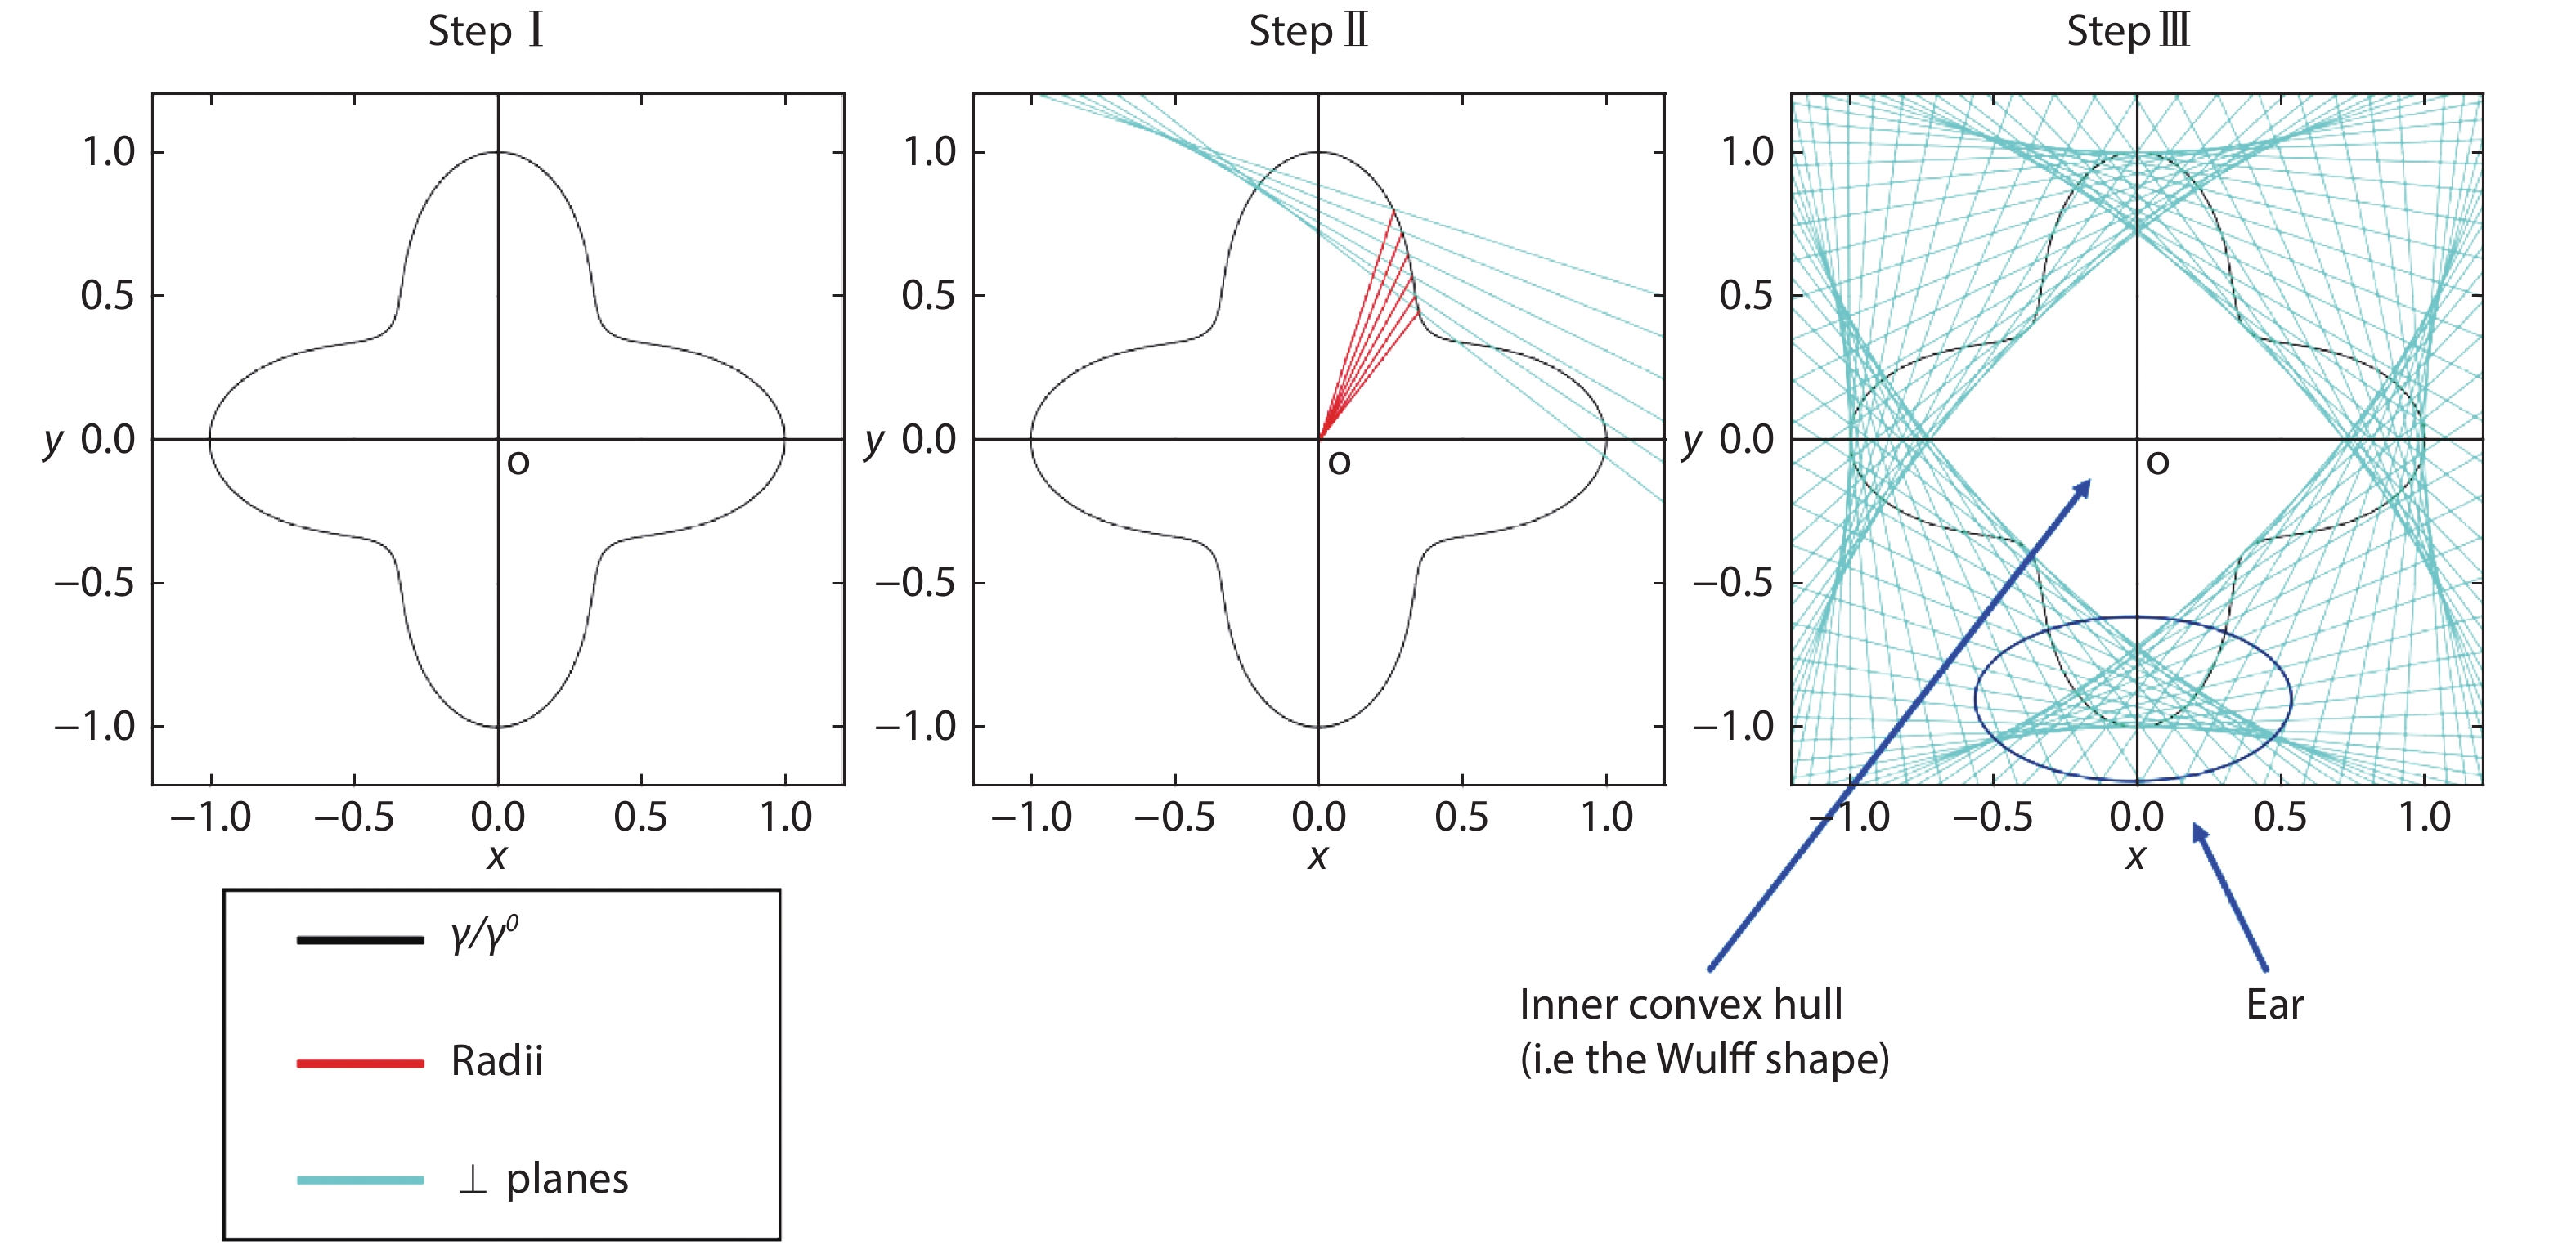 (Color online) Workflow of Wulff construction: (I) draw a -plot (black line) in which is used as a normalization constant; (II) draw planes (green line) at every point on the -plot that are perpendicular to the line drawn from the origin to that point; (III) Wulff shape is obtained as the inner convex hull and "ears" appear as indications of missing angles of the Wulff shape.